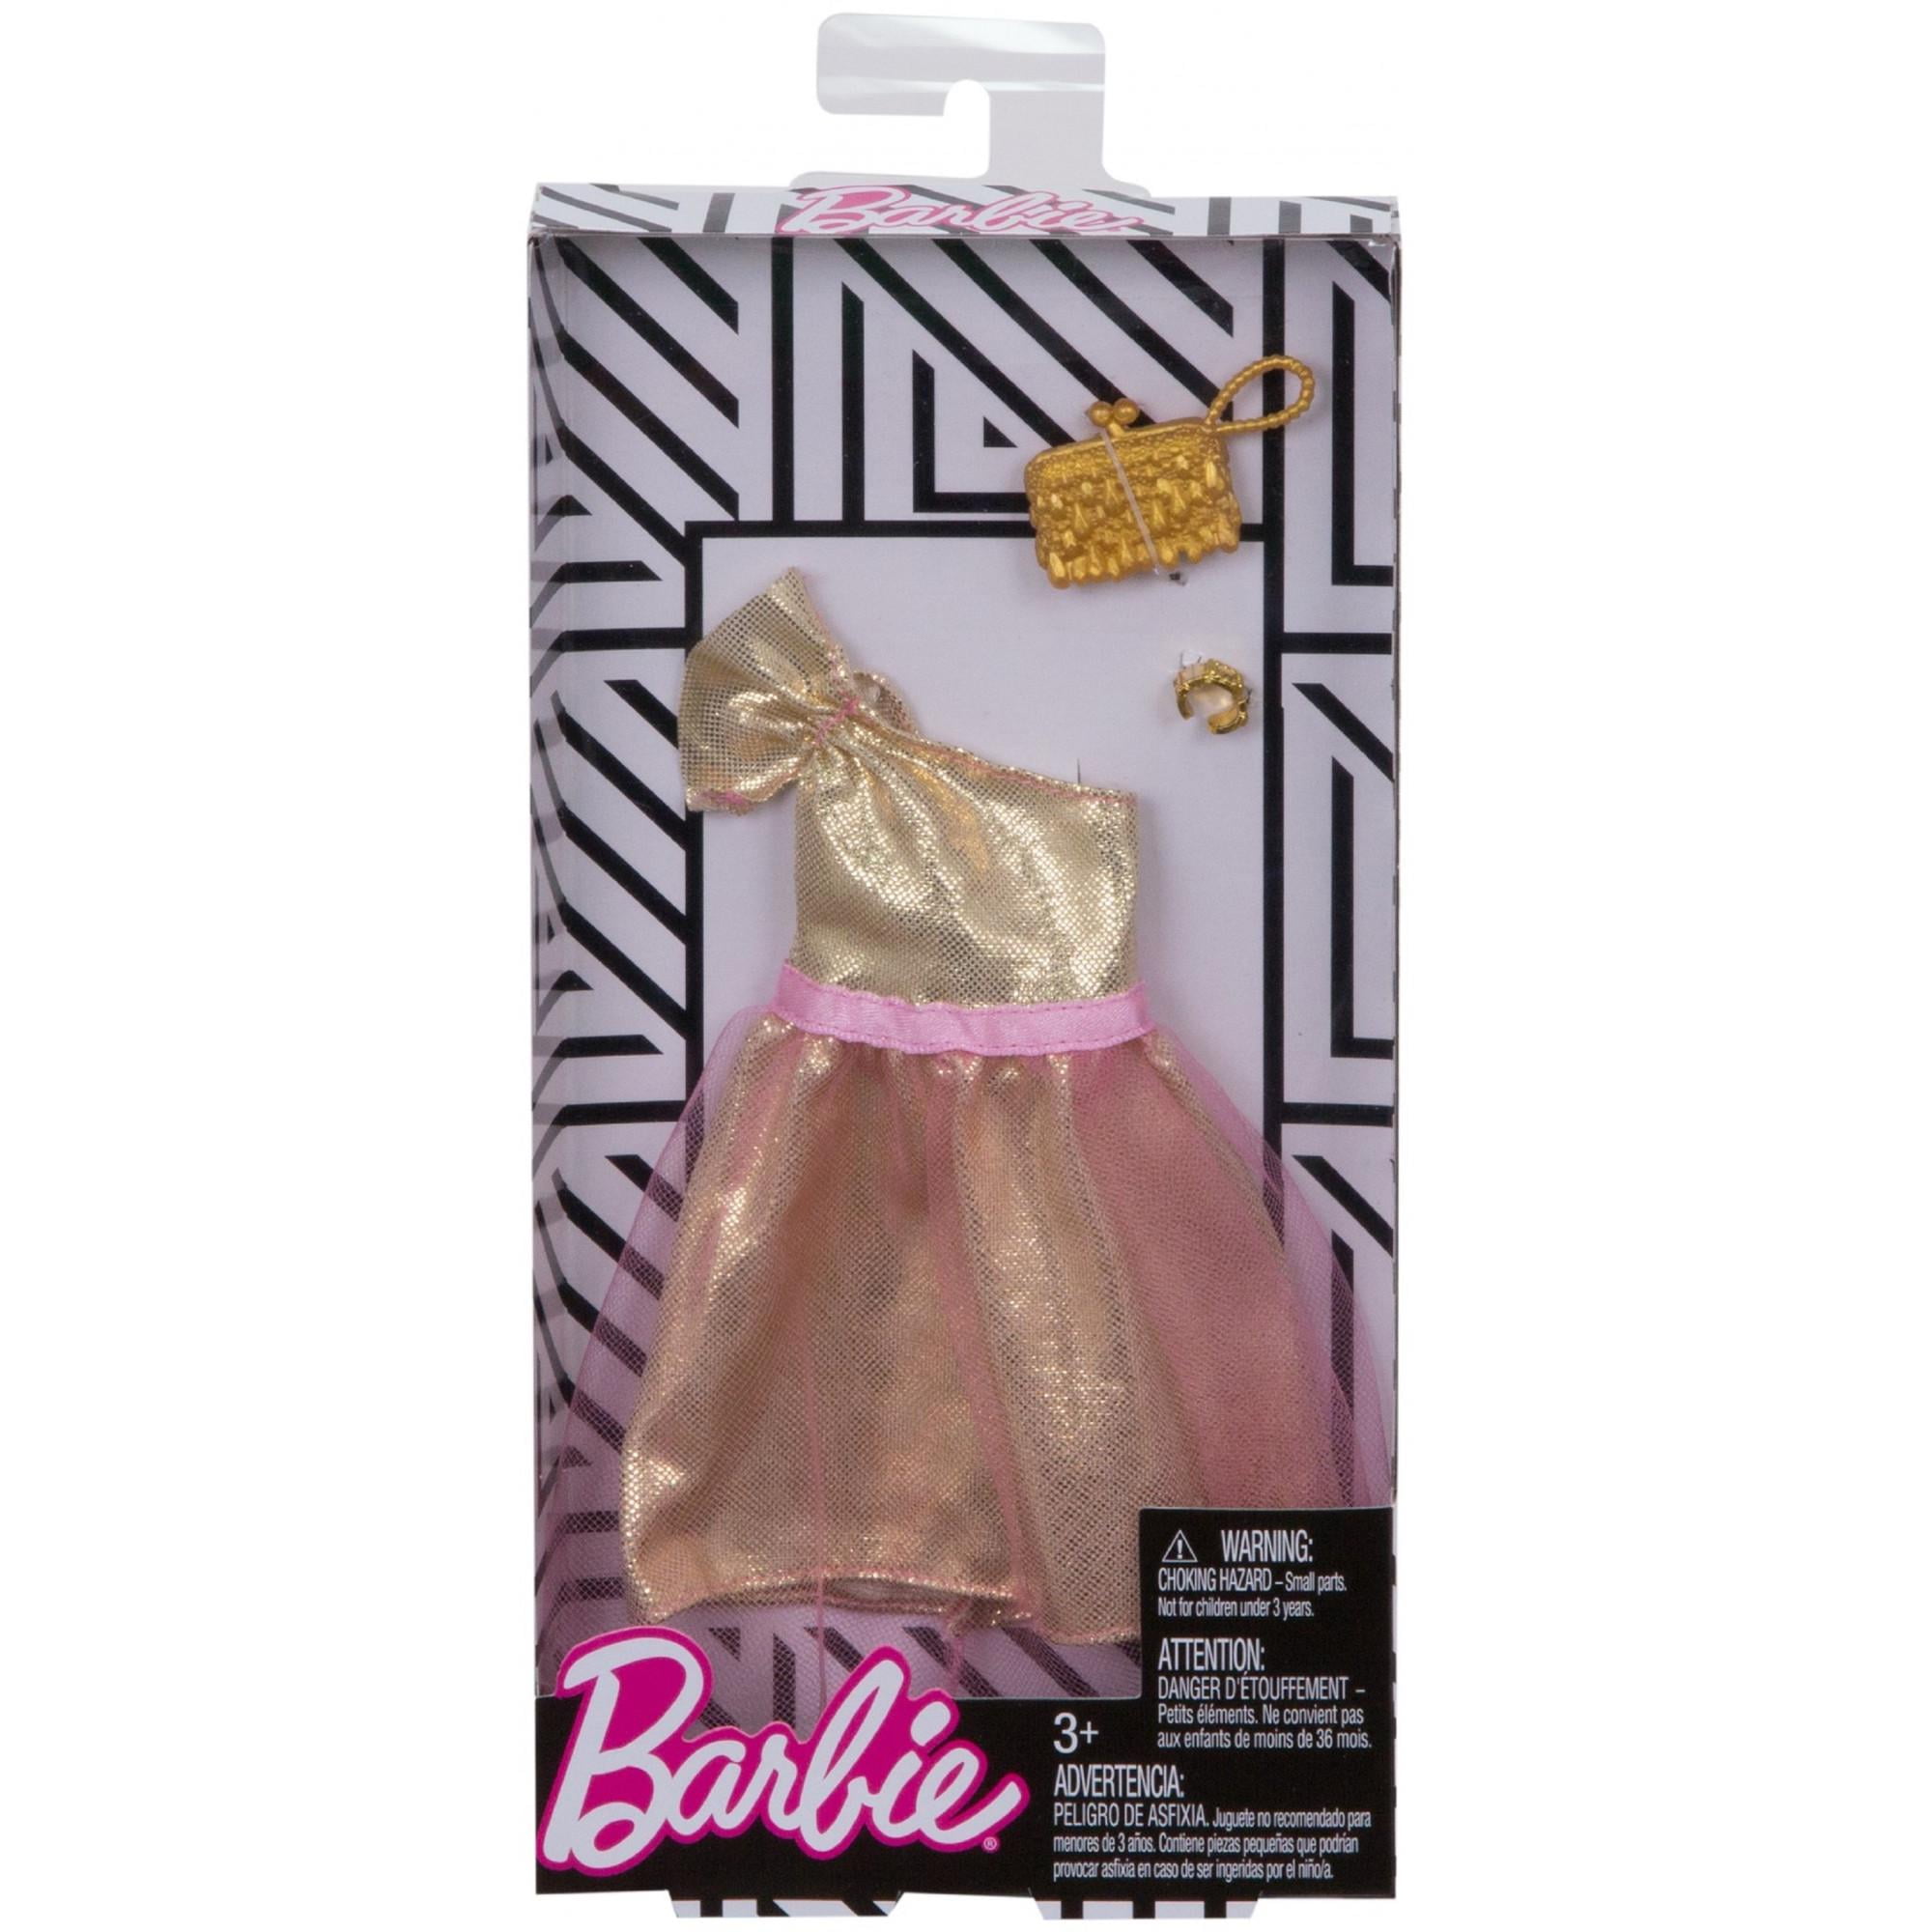 One Sleeve Gold and Coral Pink Peach Dress Genuine BARBIE Fashion SUAVE 